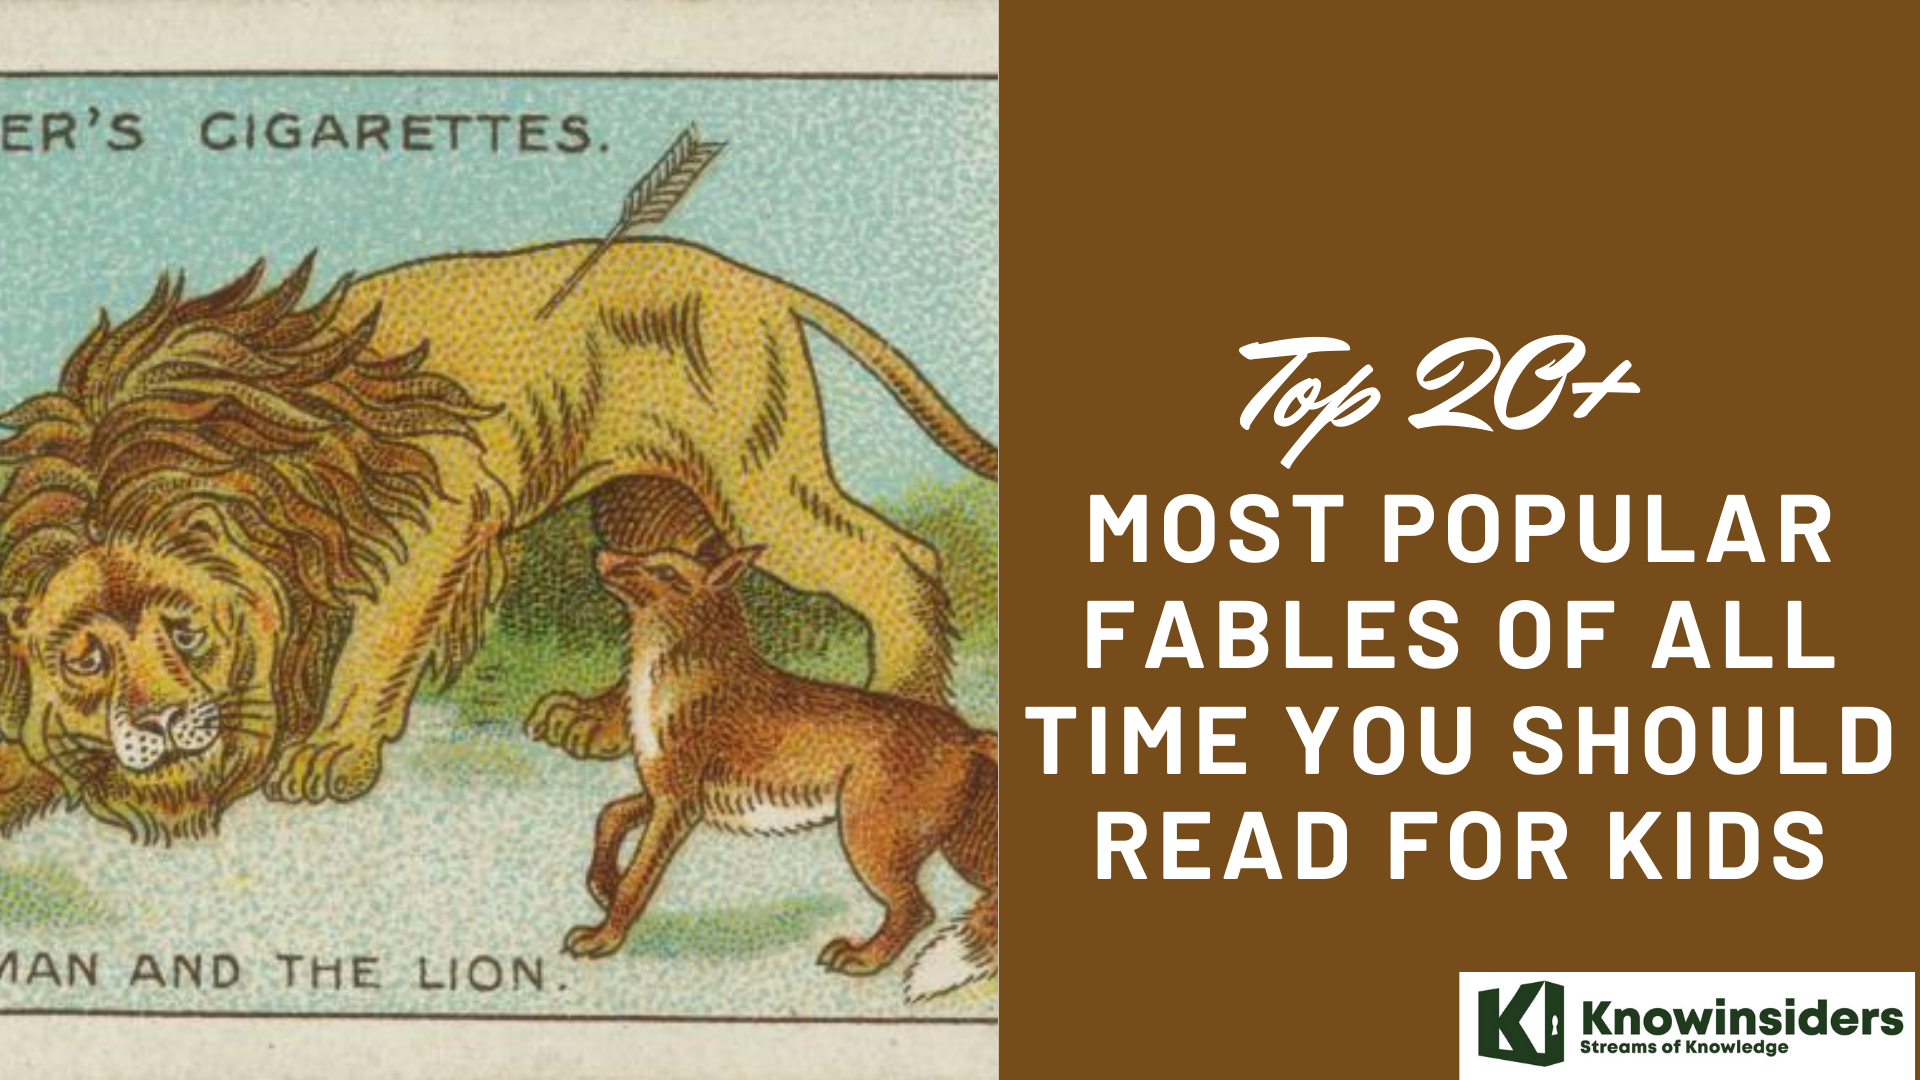 Top 30 Most Popular Fables and Lesson You Should Read For Kids